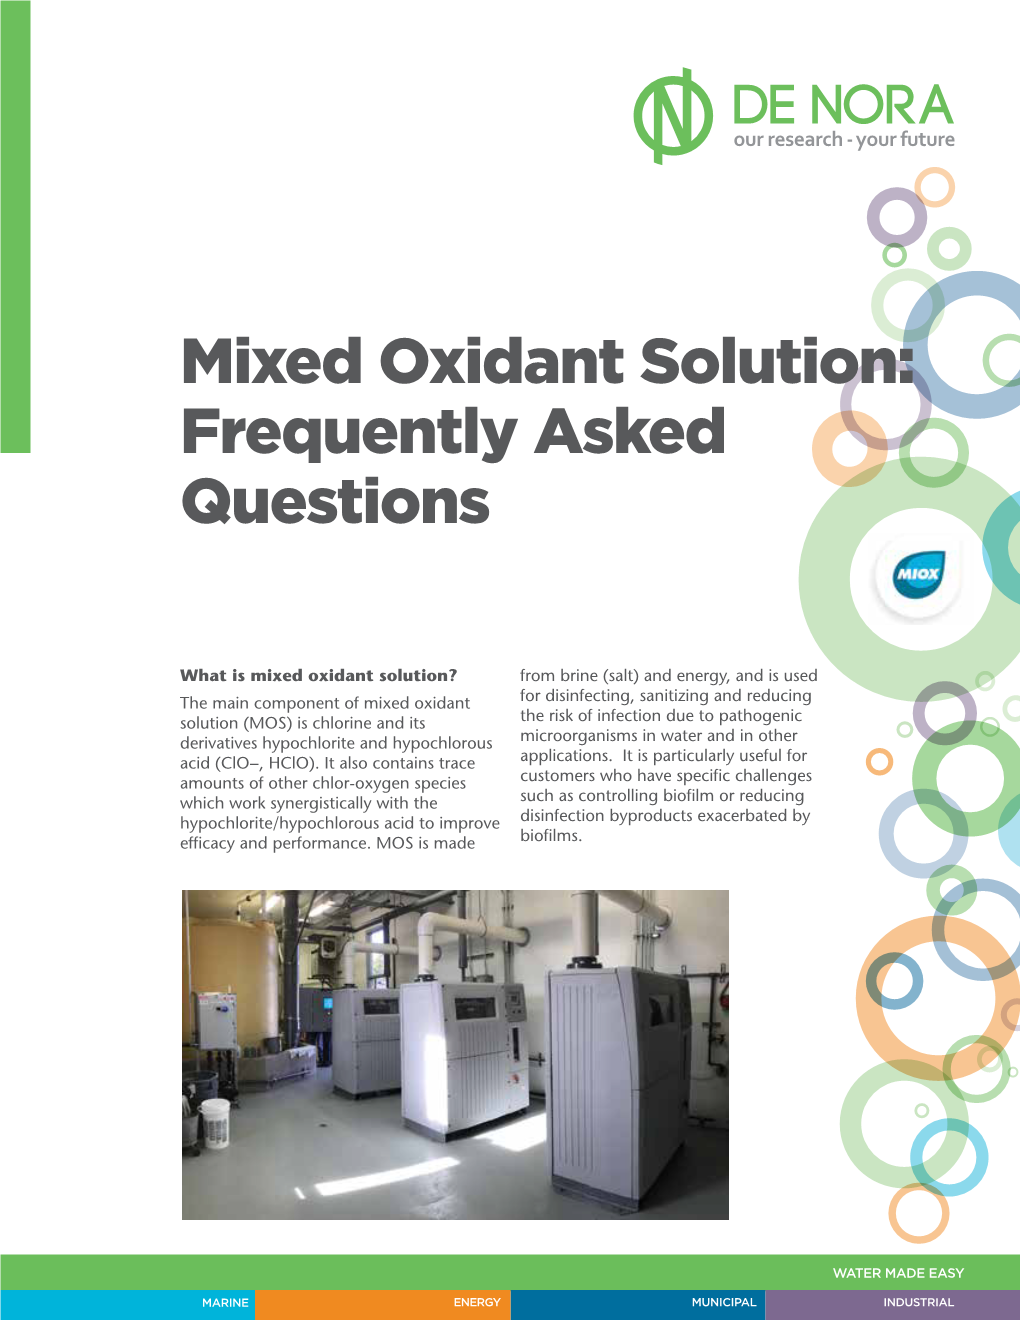 Mixed Oxidant Solution: Frequently Asked Questions